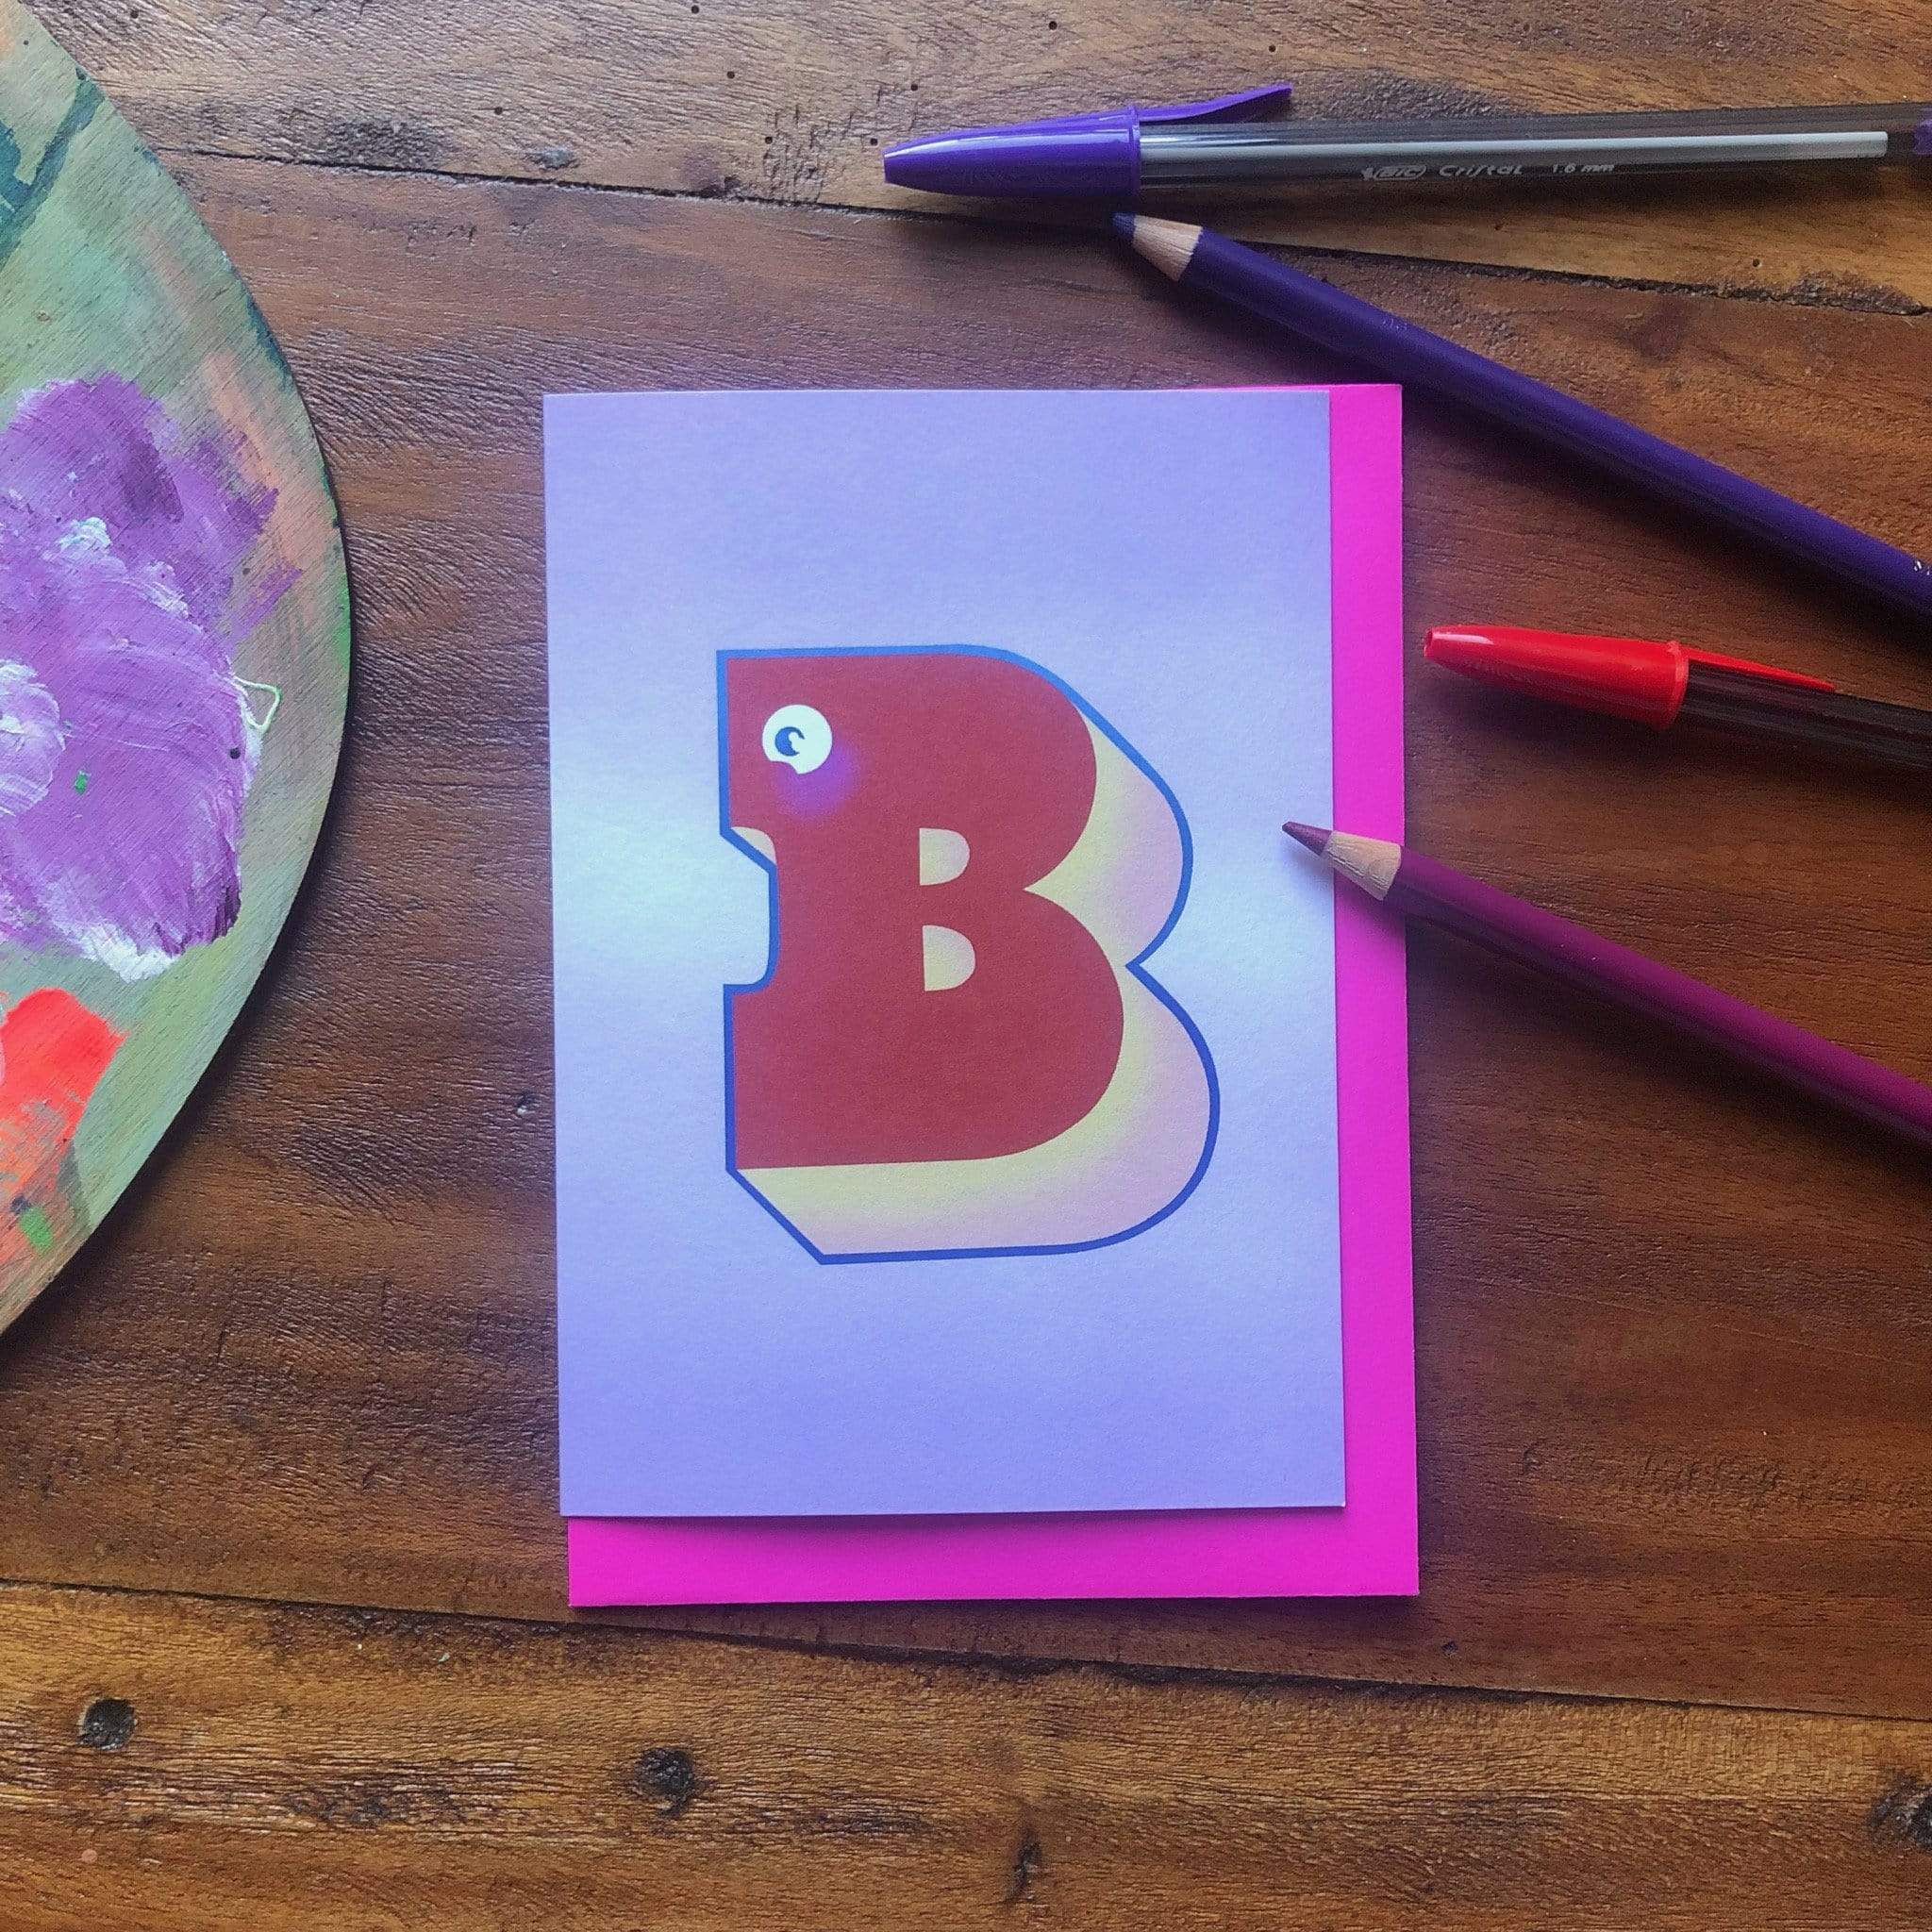 The Jolly Type B Greeting Card